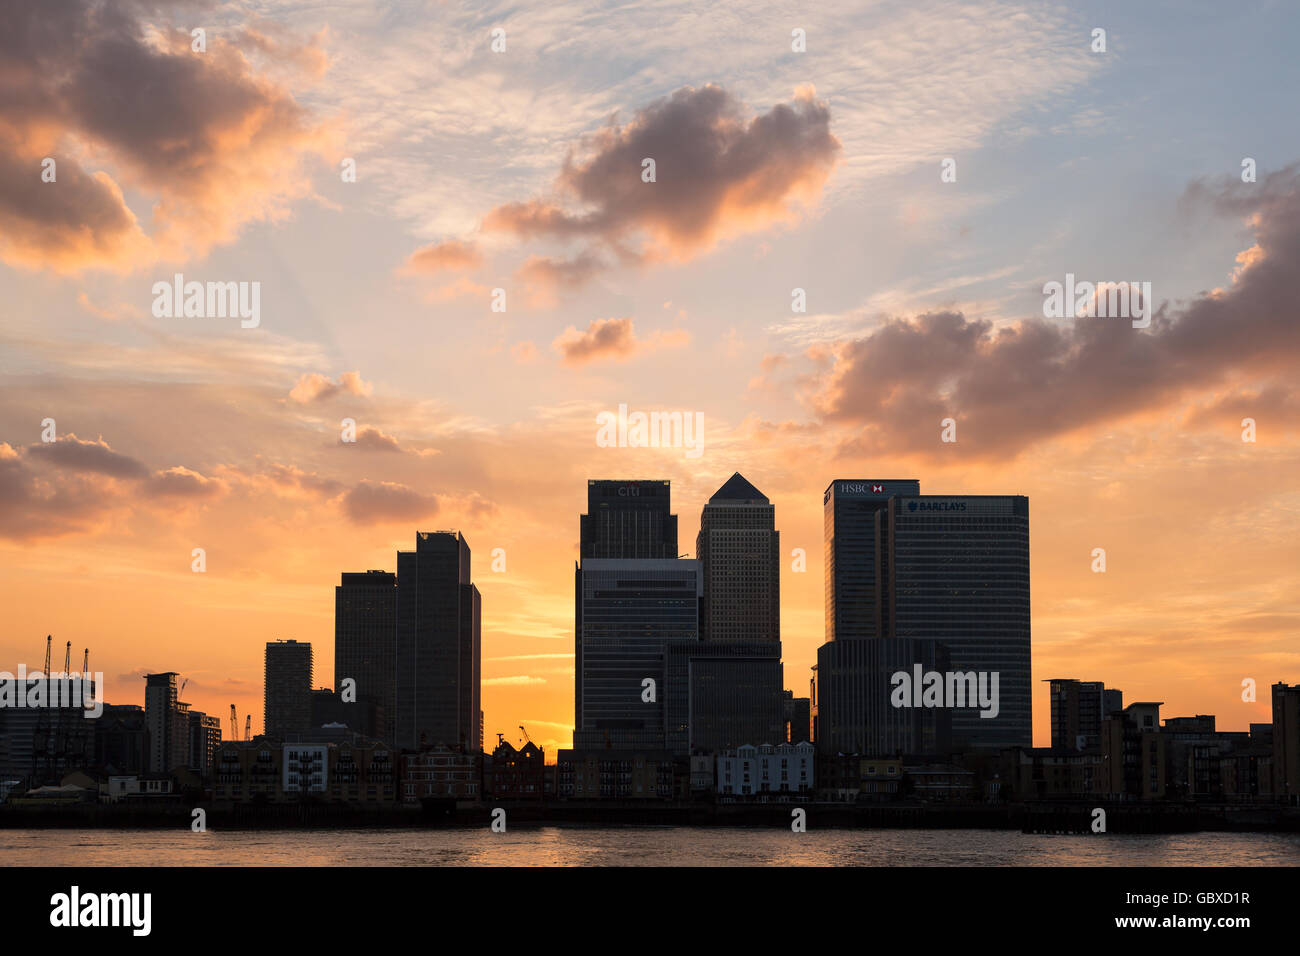 Skyline at sunset Canary Wharf, Londres, Angleterre Banque D'Images